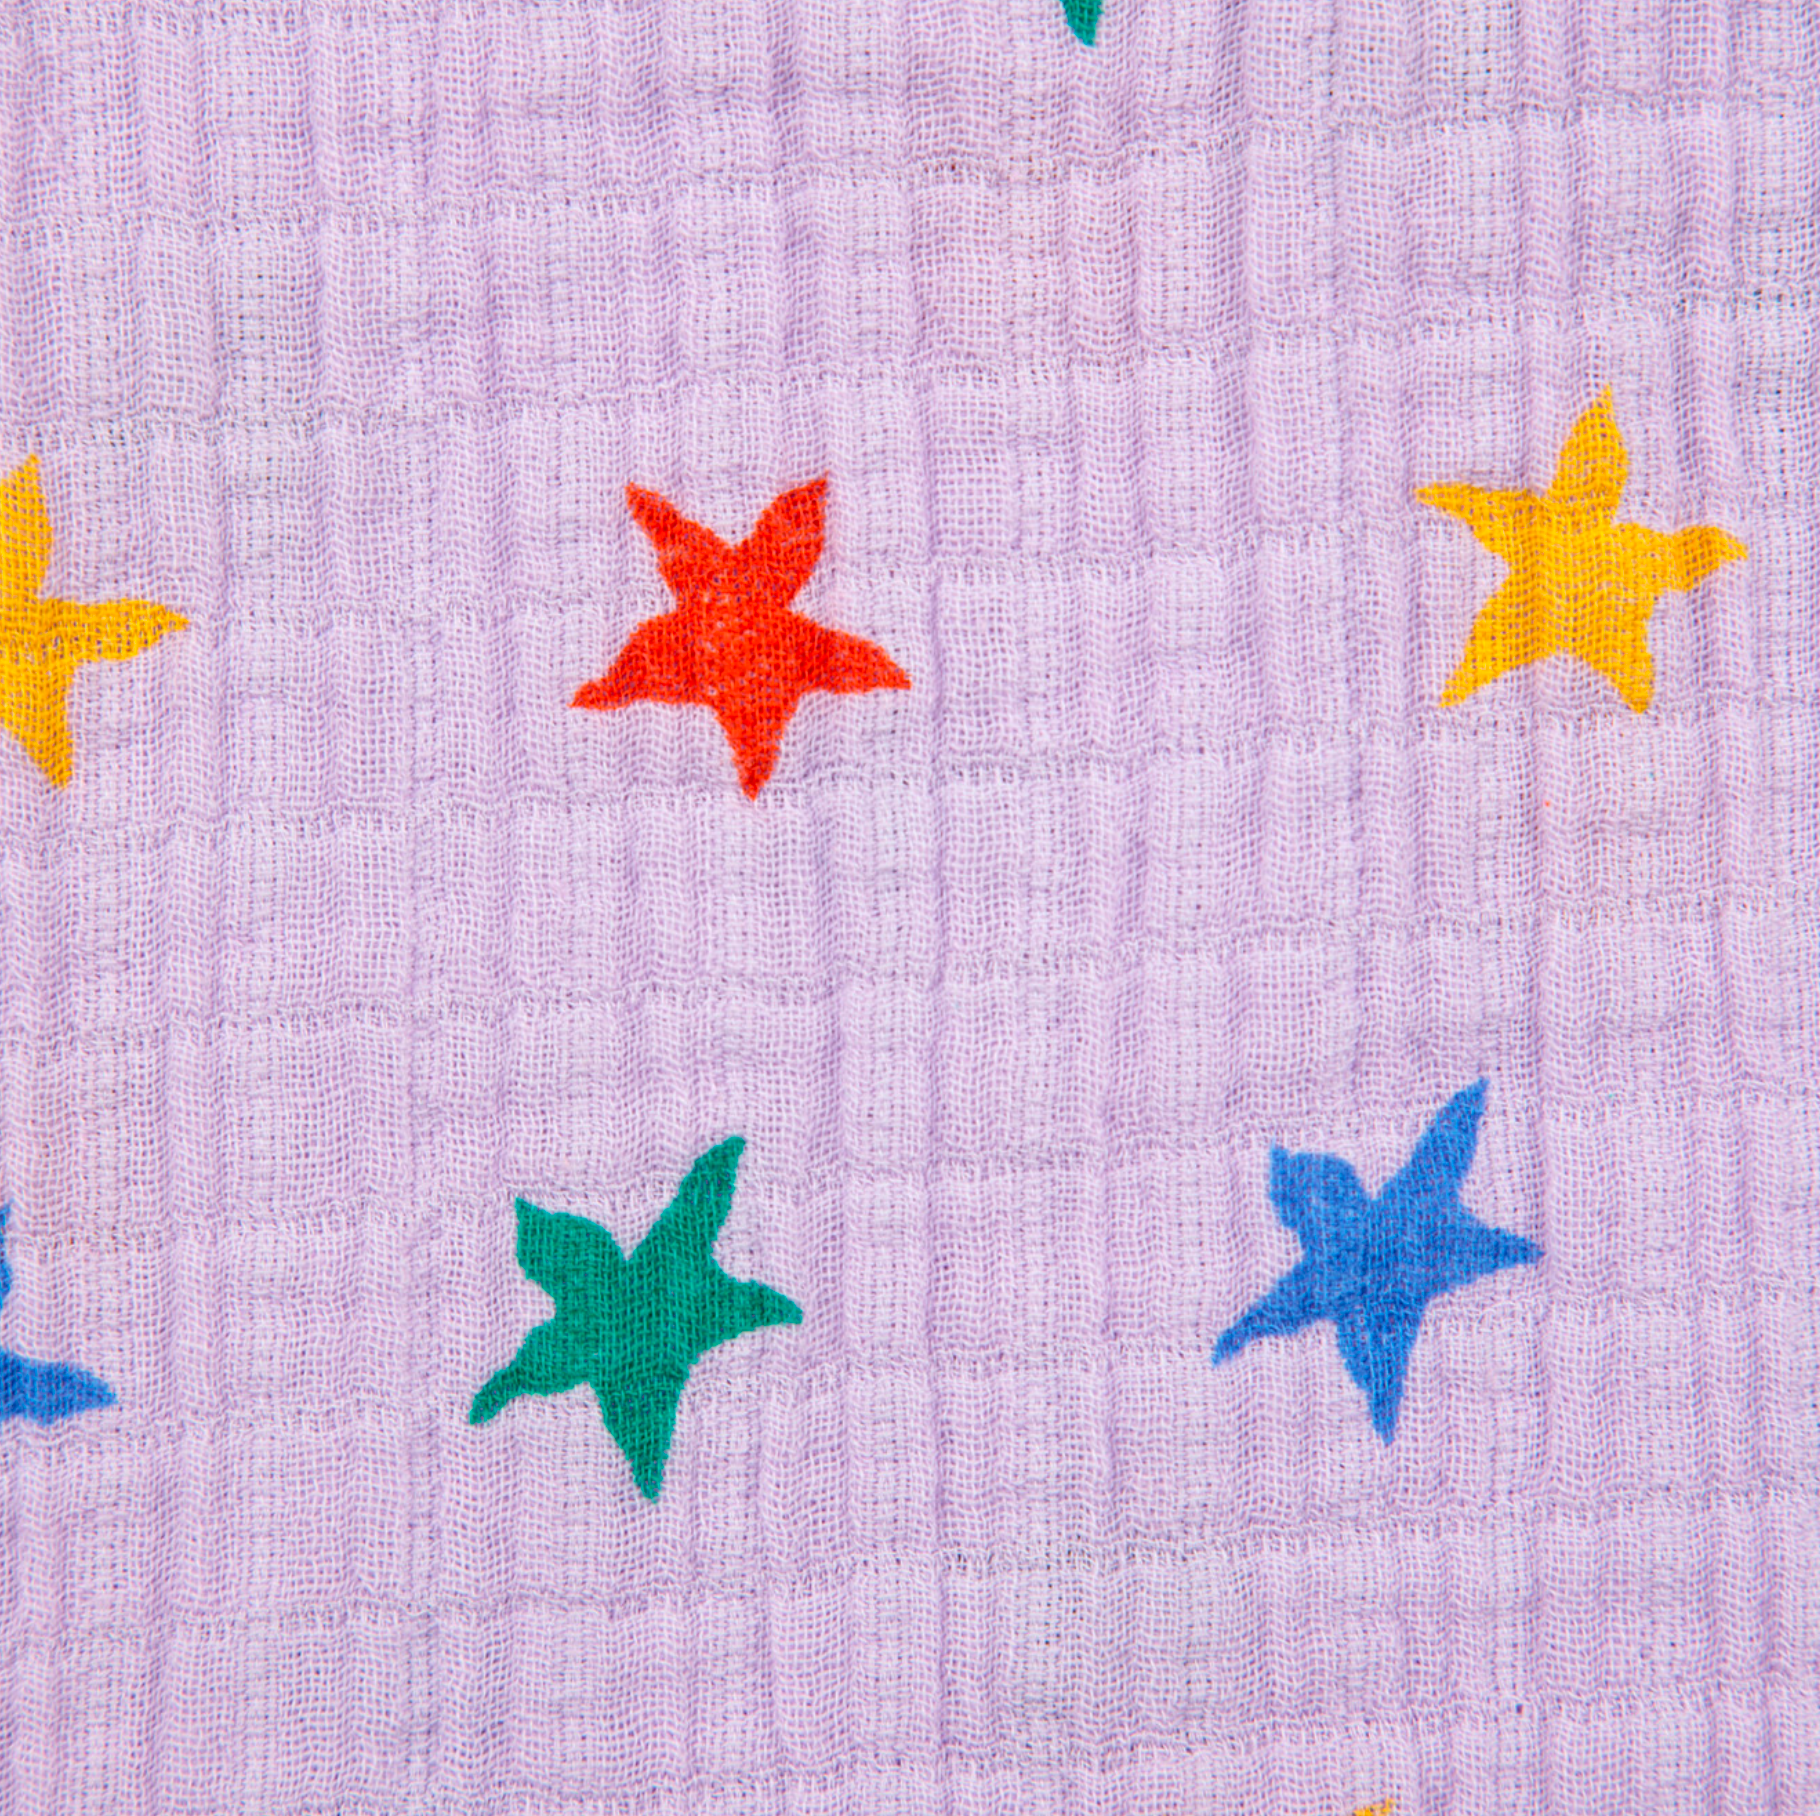 BOBO CHOSES - Skirt with stars - 10 years old